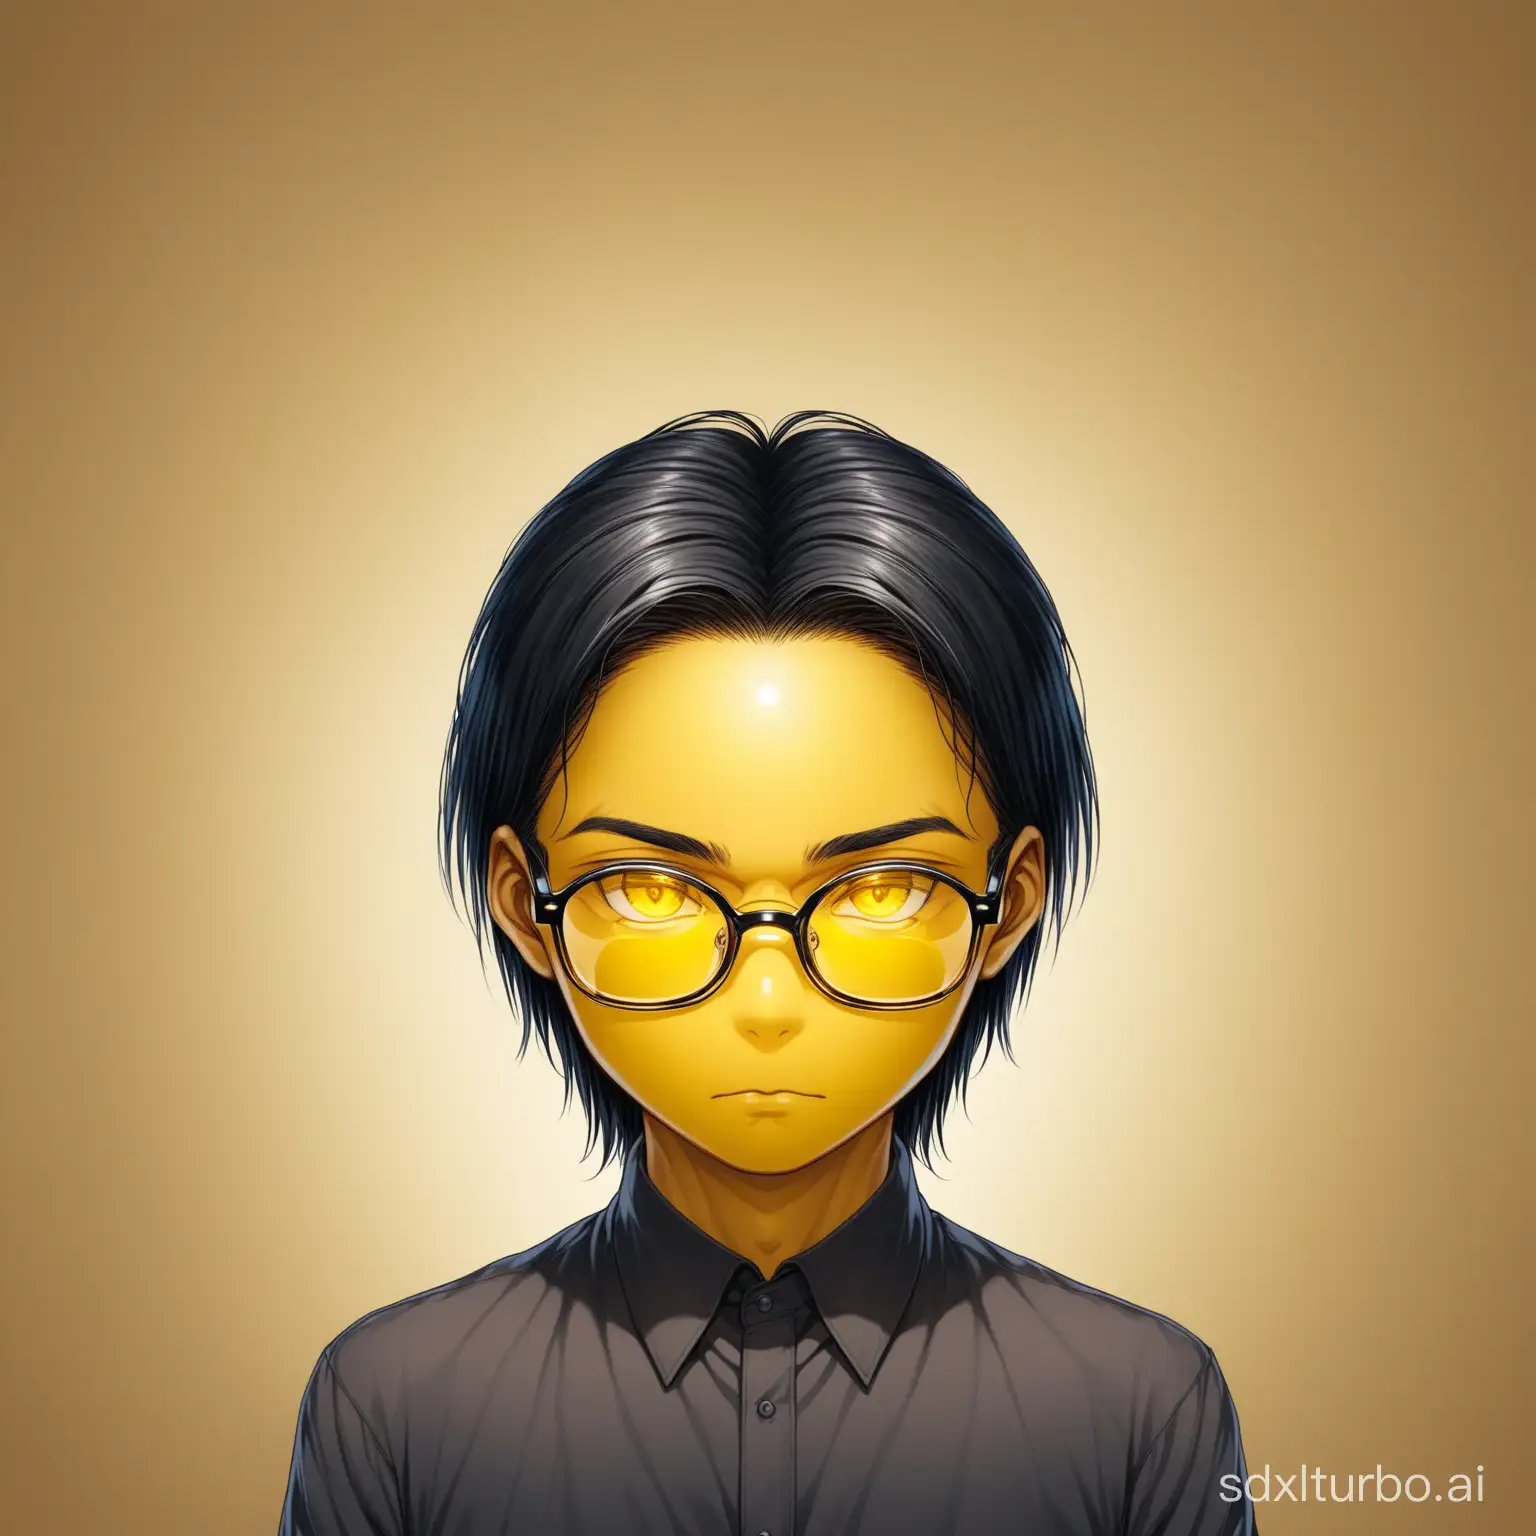 Insightful-Youth-Portrait-of-a-Visionary-with-Glasses-and-Black-Hair